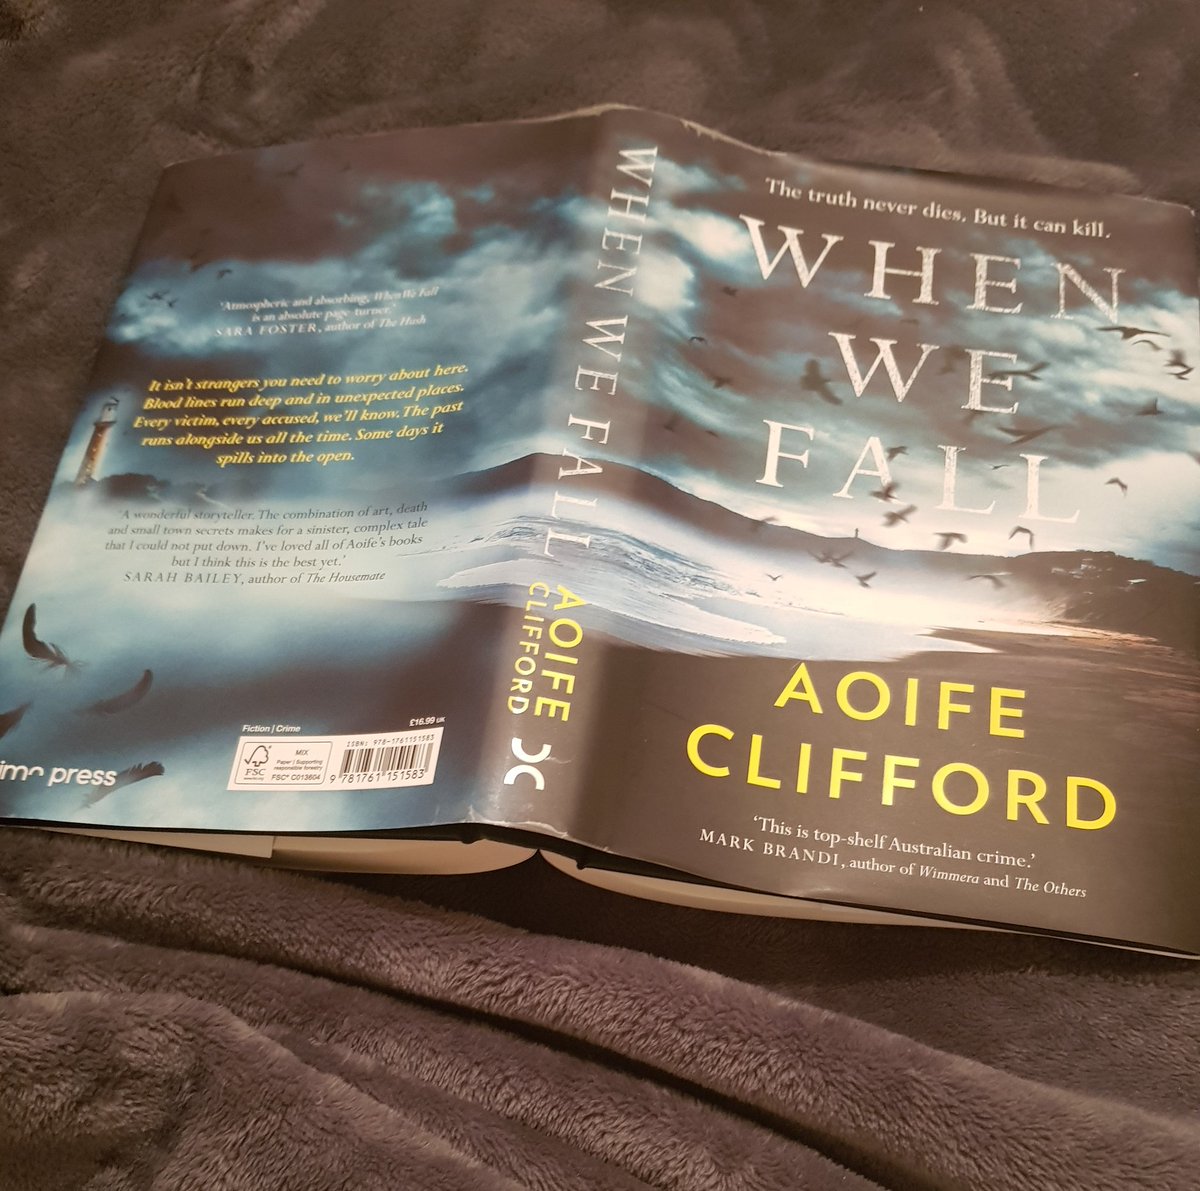 Currently enjoying this...#WhenWeFall @aoifejclifford #blogtour #Australian #crimefic...what are you reading this weekend?